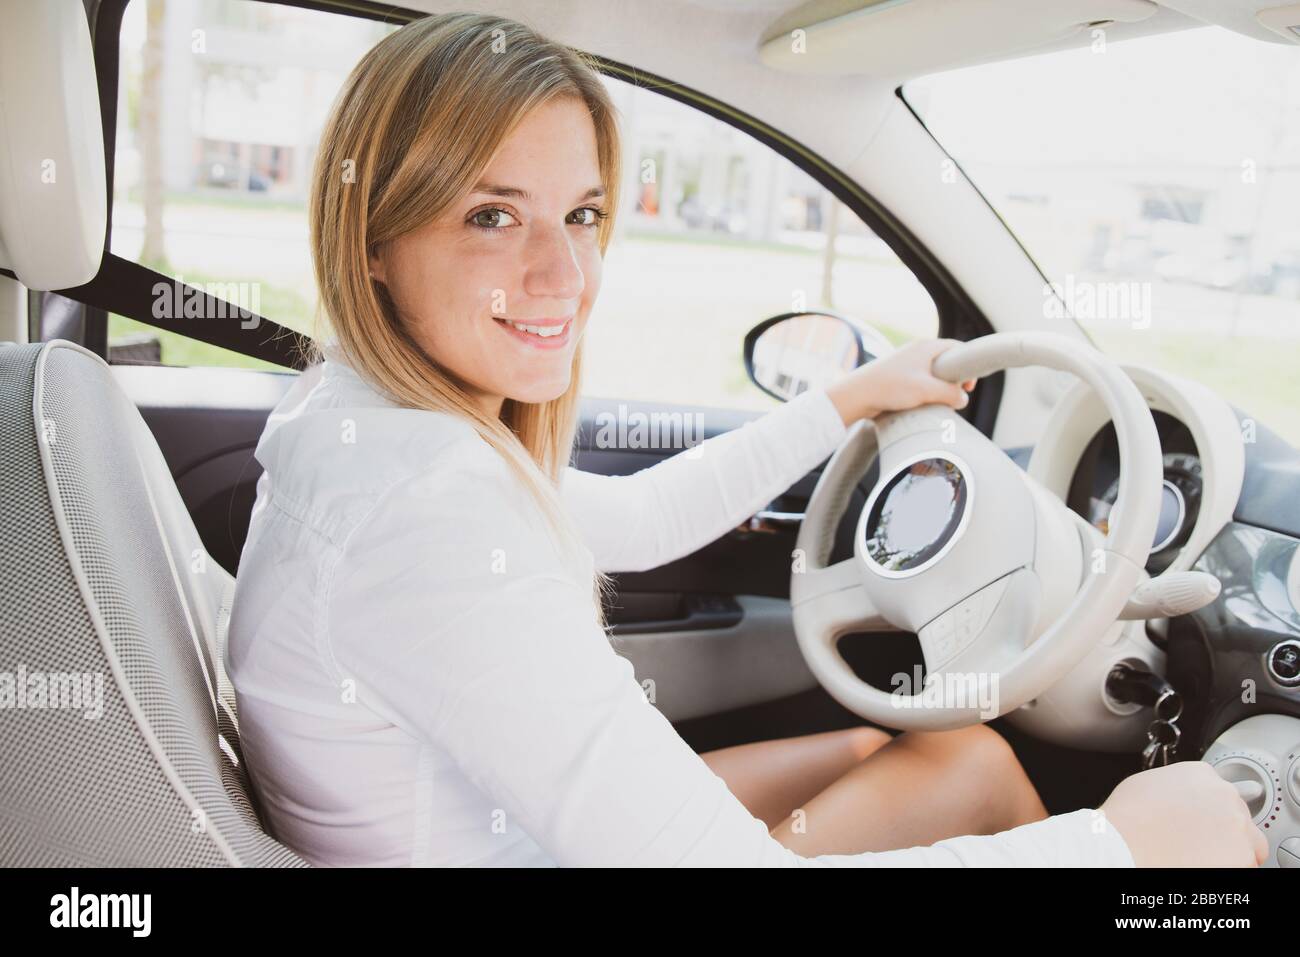 Personable young woman with nice laugh is sitting in a new car Stock Photo